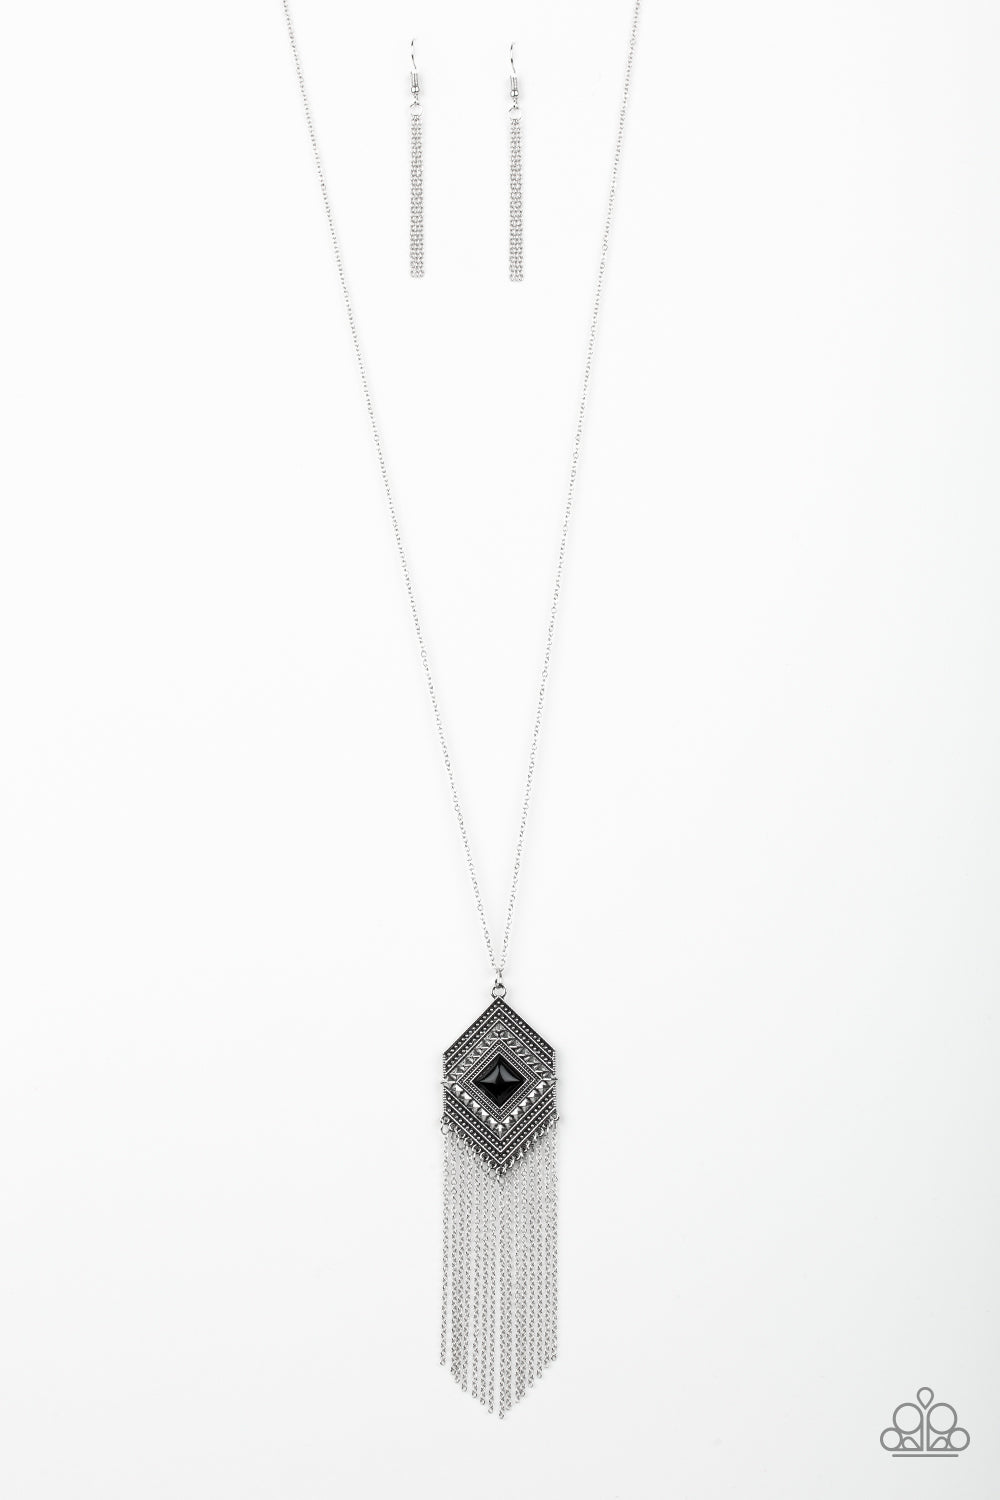 LV Ring Necklace- BLACK – Nomad'r Lifestyle Company